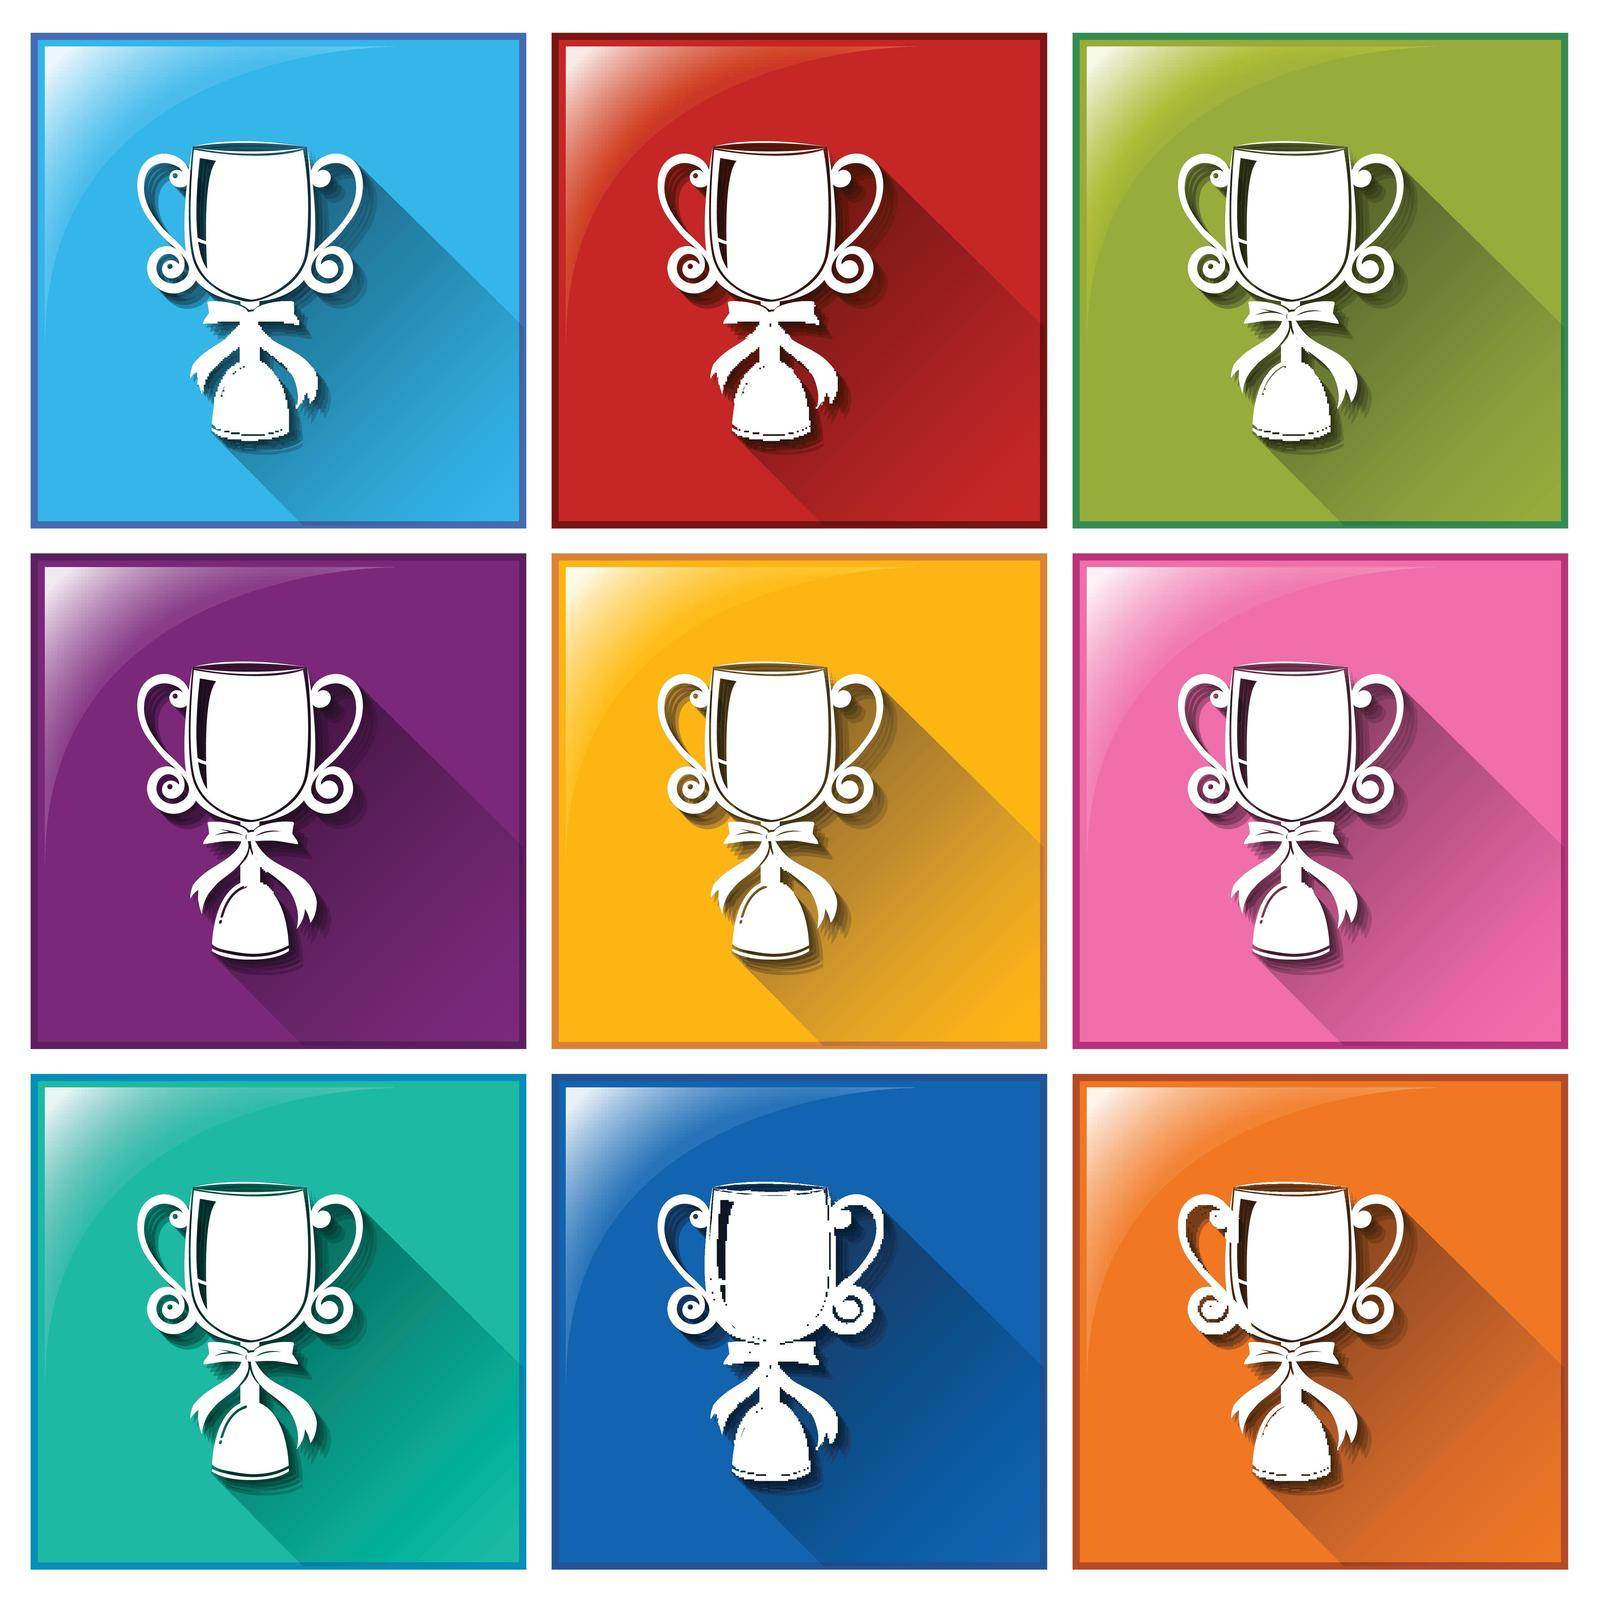 Illustration of the buttons with trophies on a white background